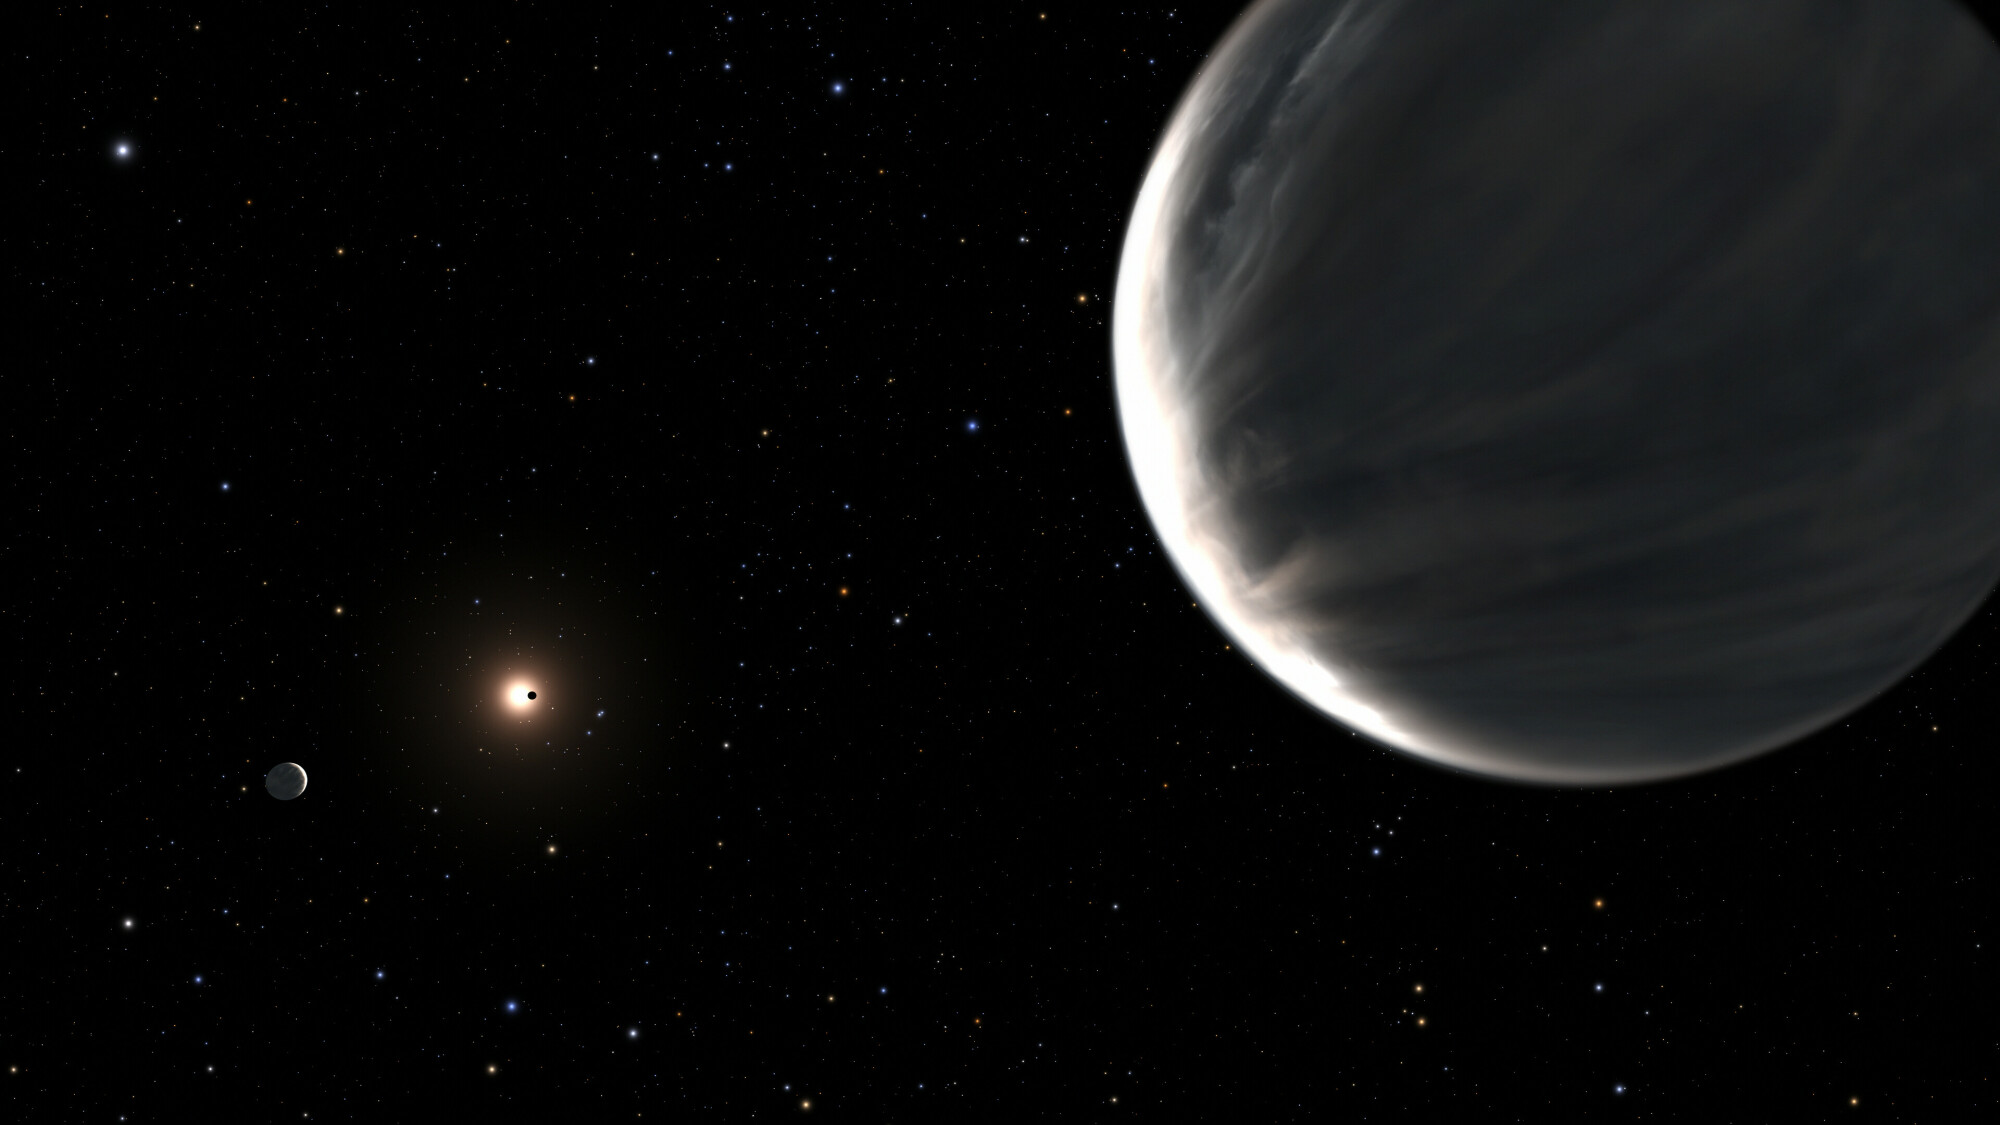 In the foreground, an artist's conception of a "water world" in a distant solar system.